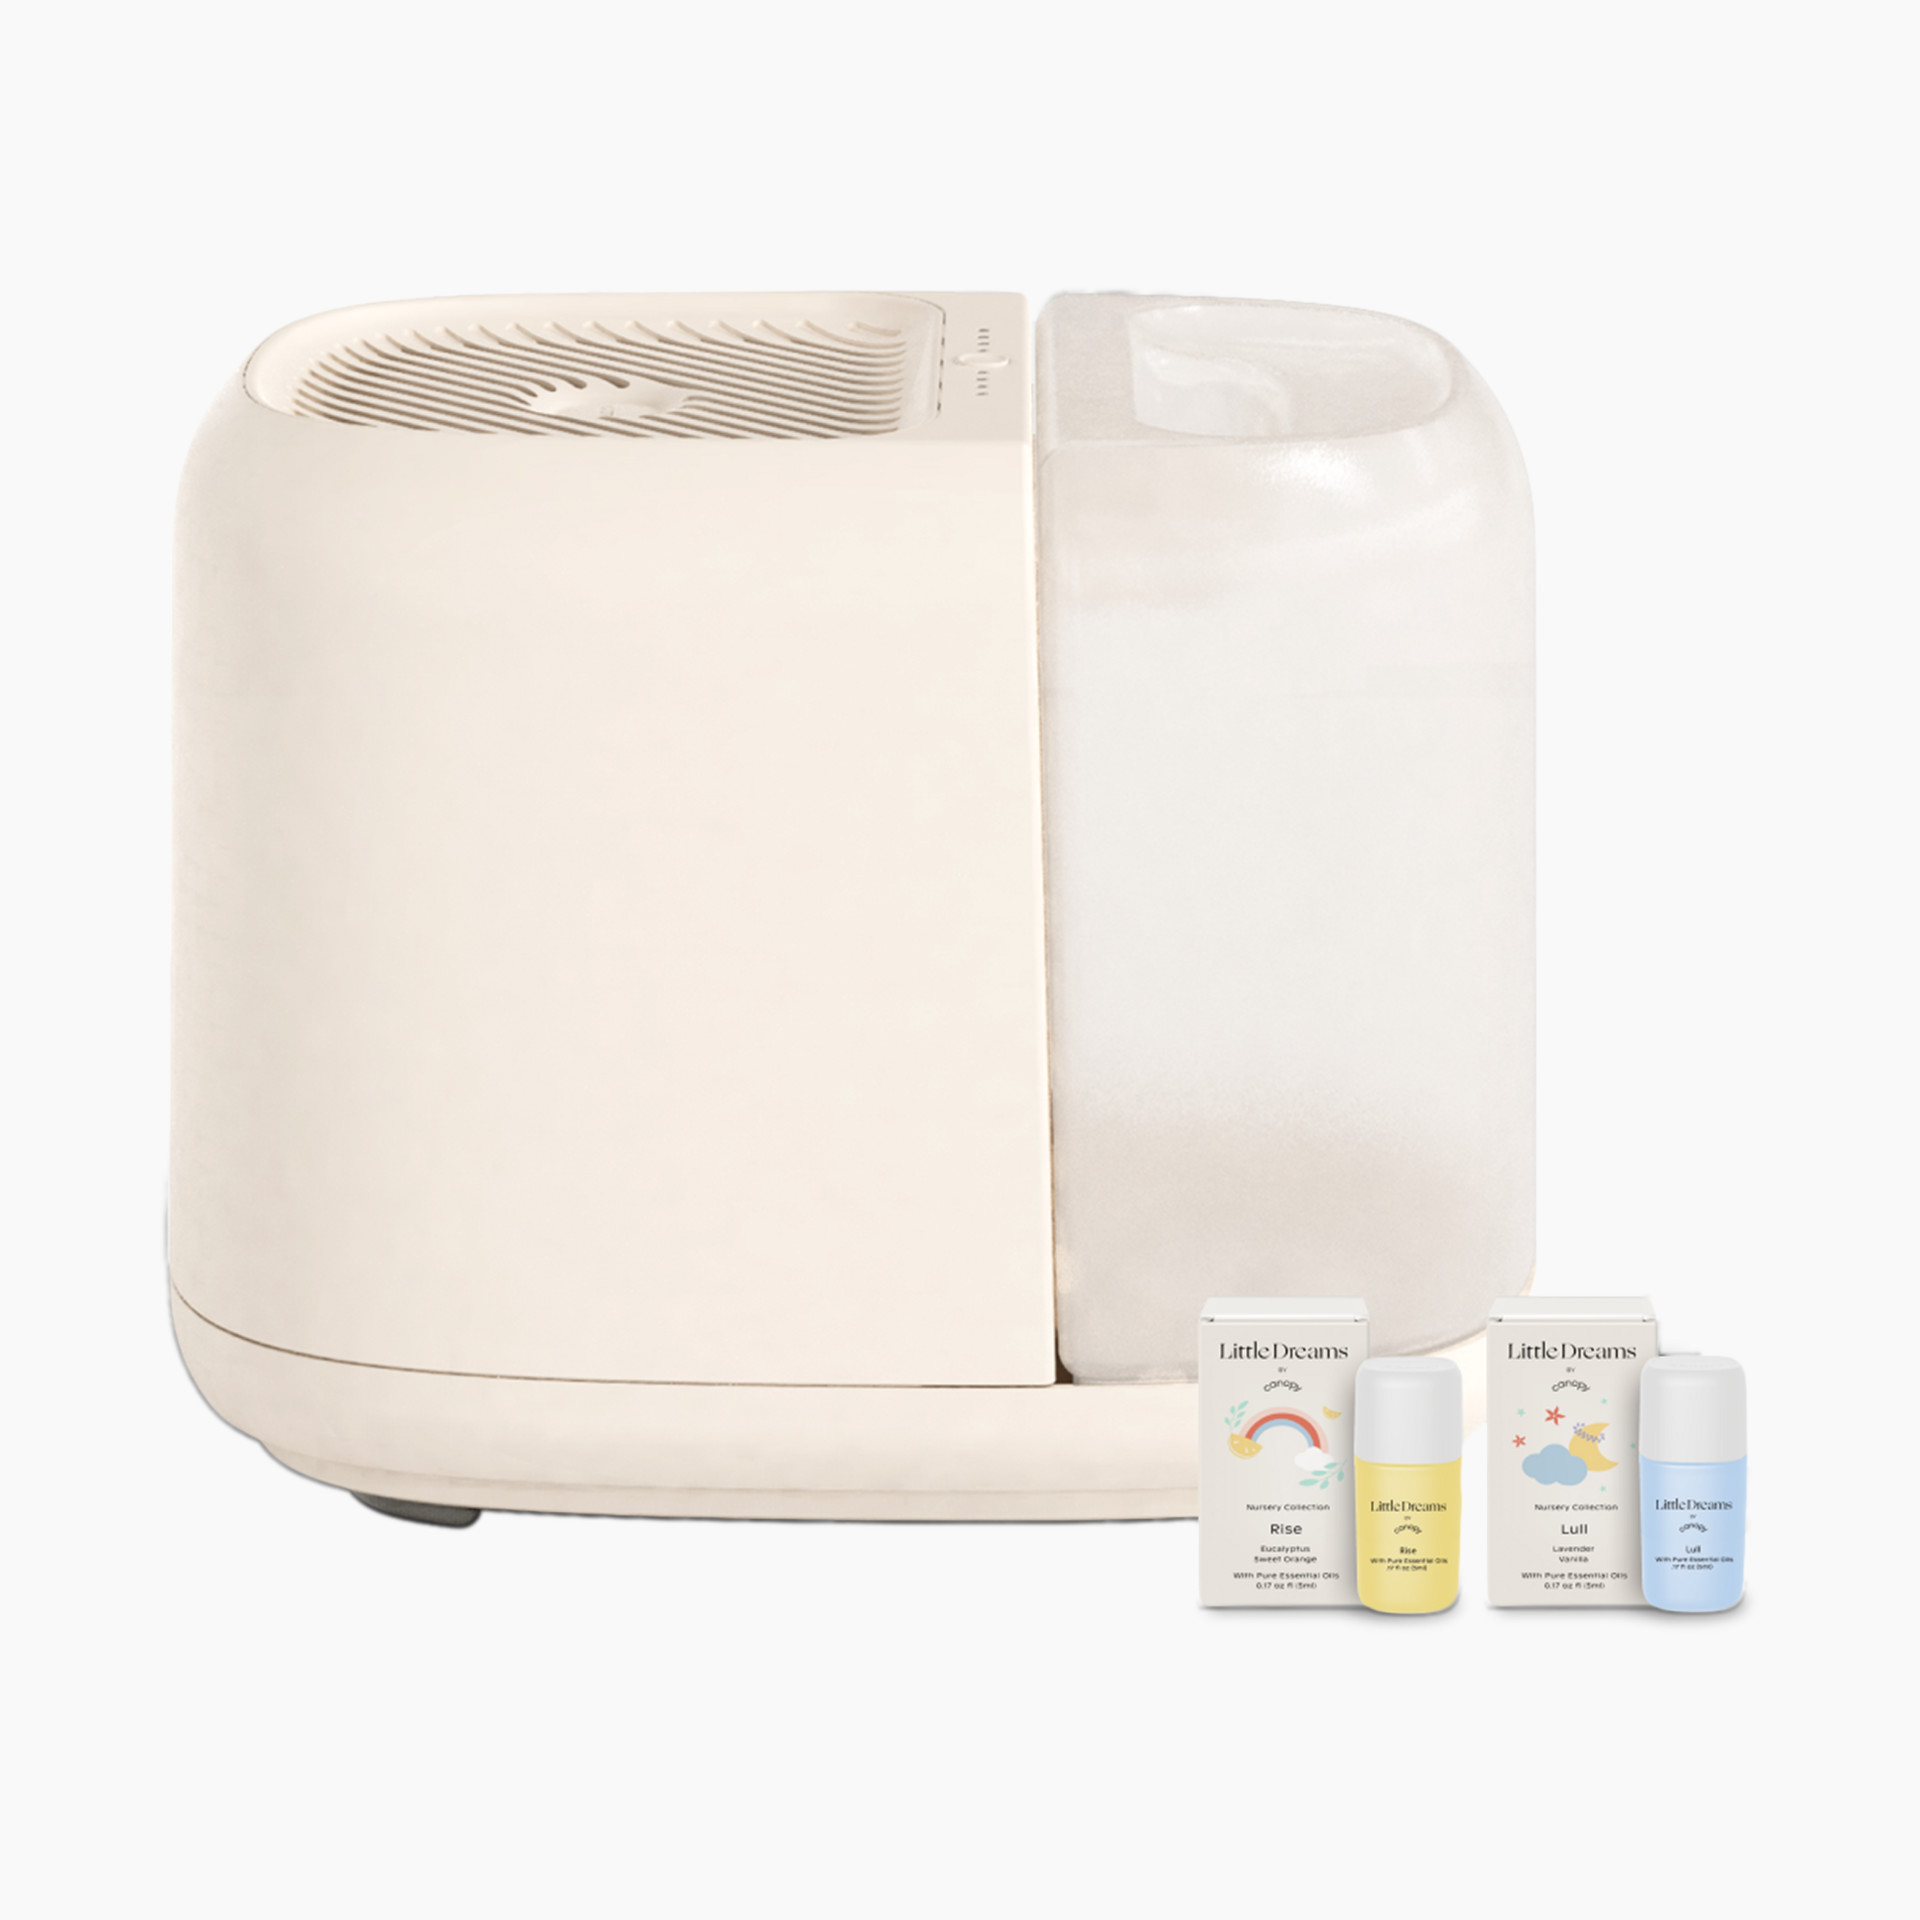 Canopy Humidifier White - for Hydrated Skin. Alleviate Cold, Flu and Allergy Symptoms